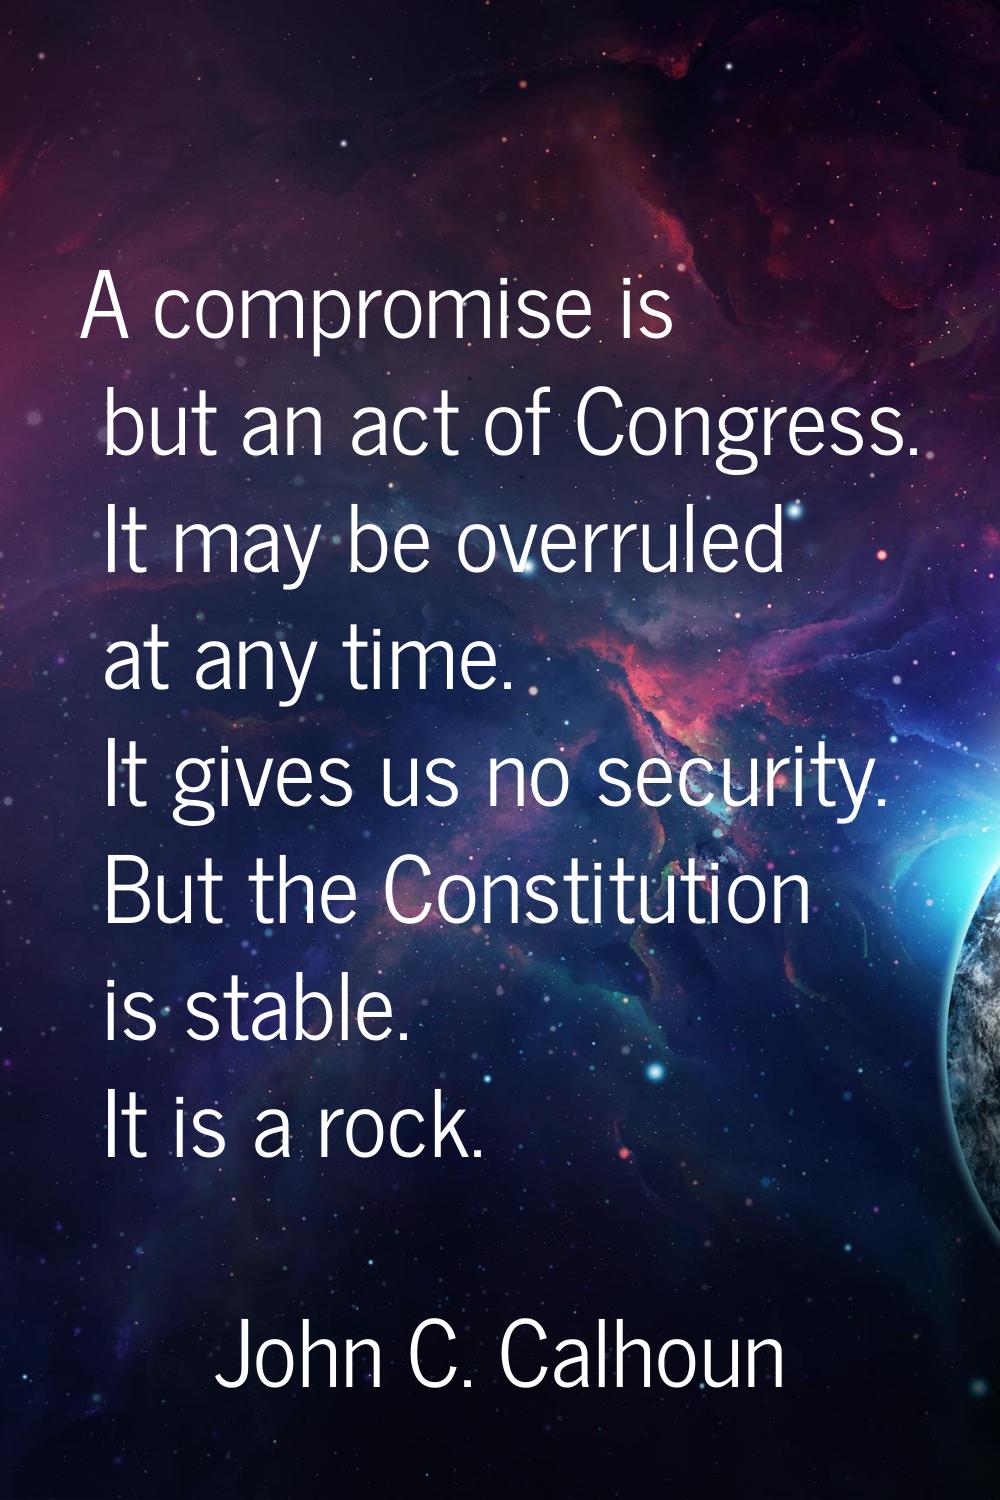 A compromise is but an act of Congress. It may be overruled at any time. It gives us no security. B